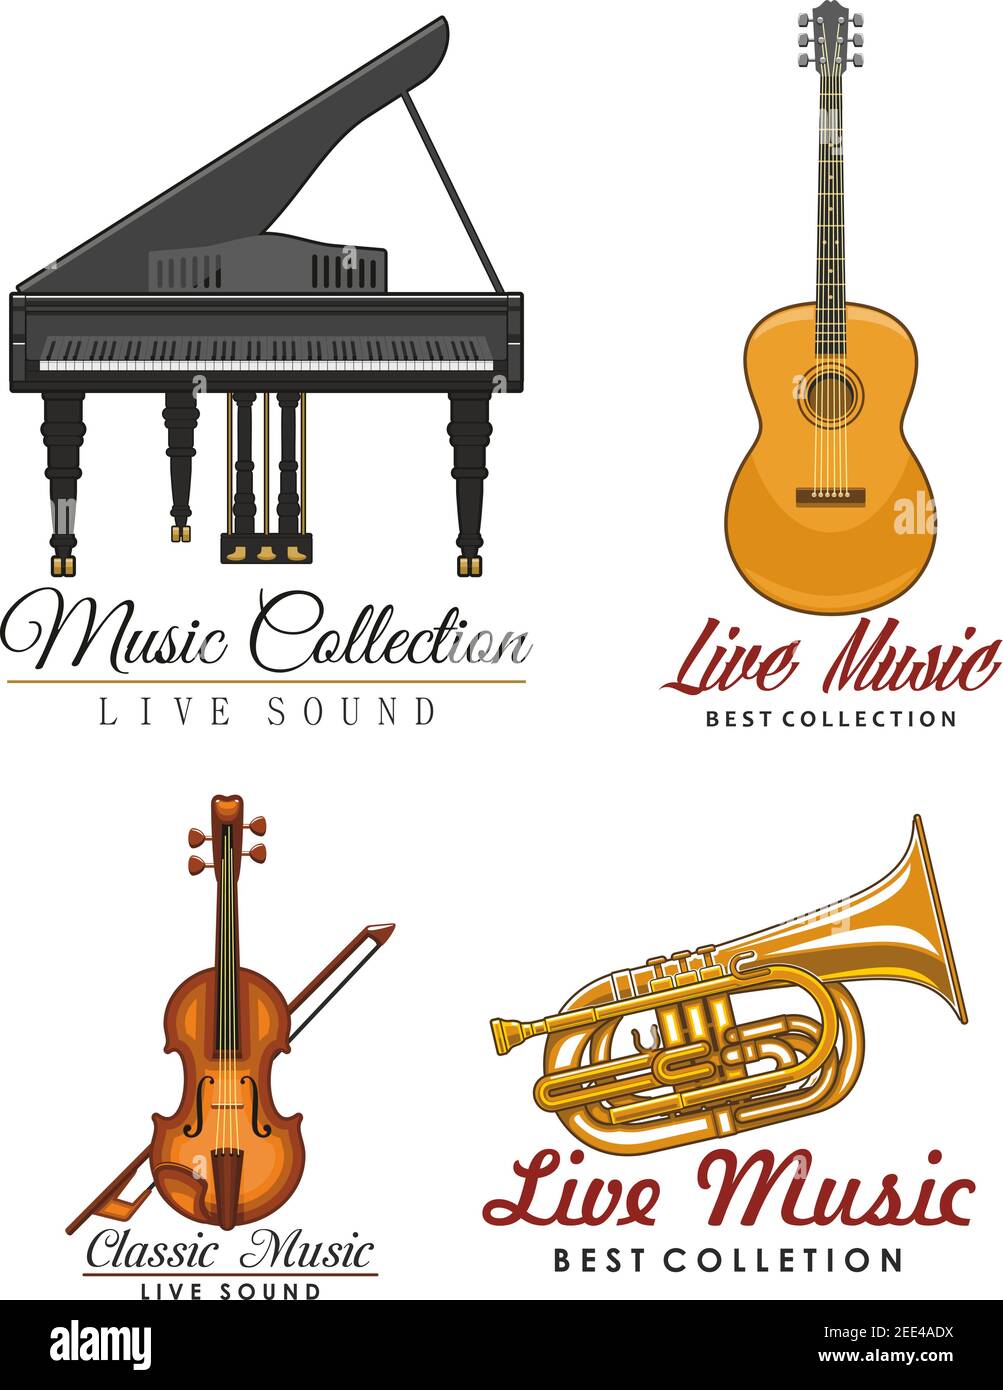 Live music vector icons set for musical sound festival labels. Isolated symbols of classic musical instruments piano and guitar, fiddle violin or cont Stock Vector